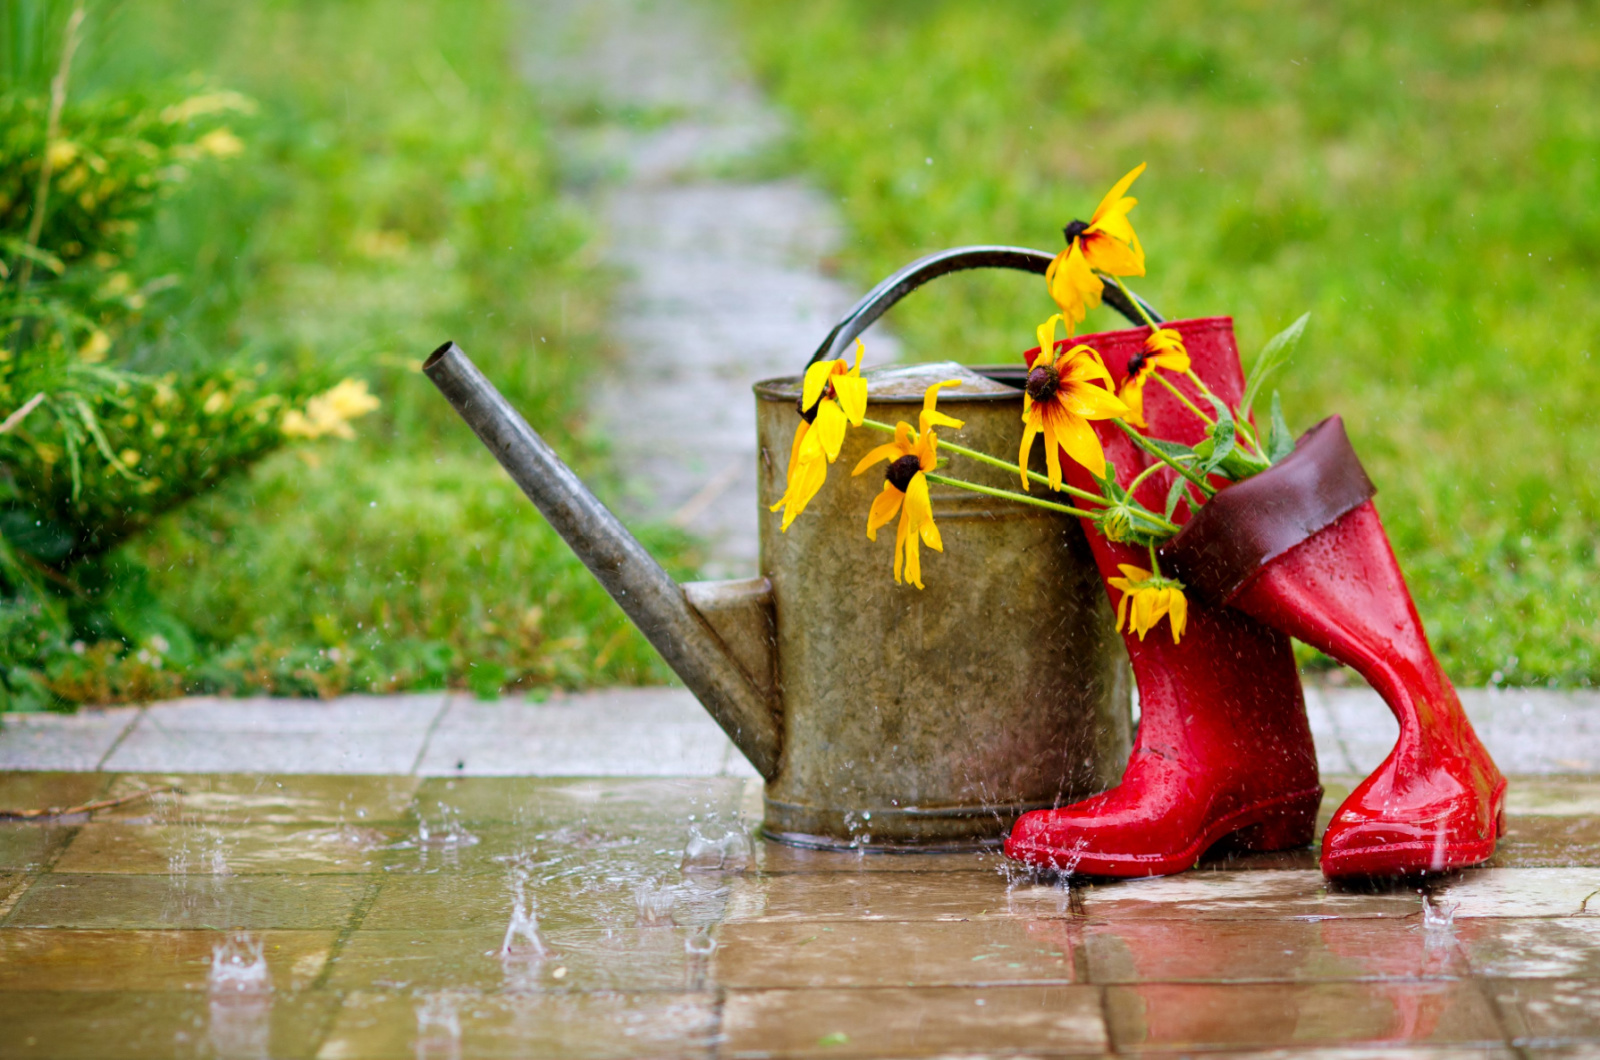 Red rain boots, watering can and flowers